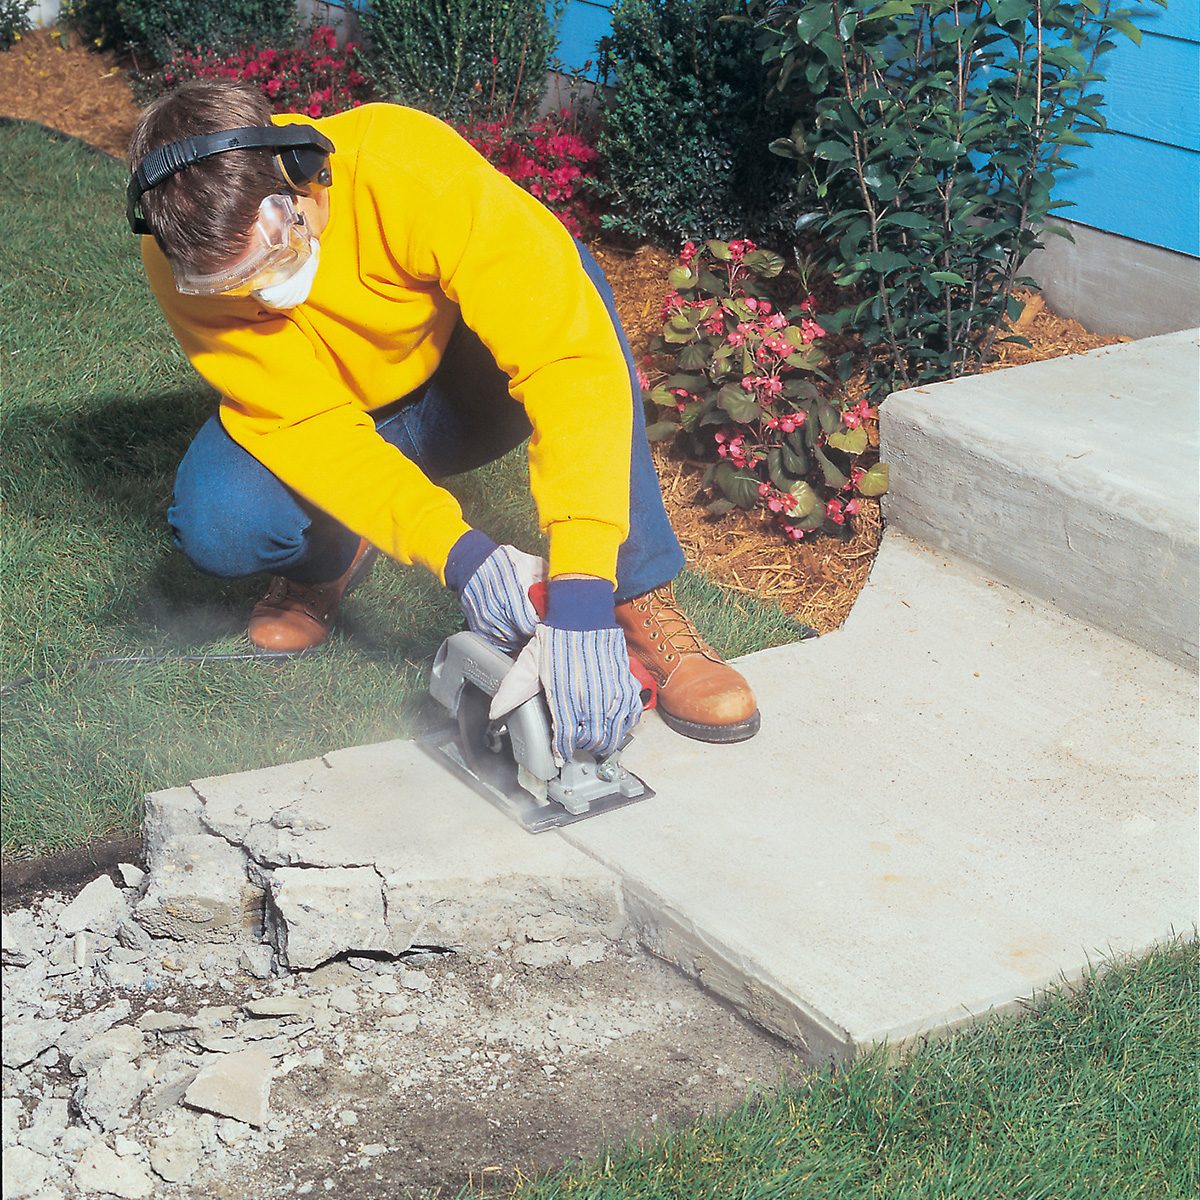 A person wearing protective glasses, ear protection, gloves, and a yellow jacket is using a circular saw to cut through a concrete slab next to a garden bed with green plants and flowers. The person is kneeling on one knee for better control of the saw.